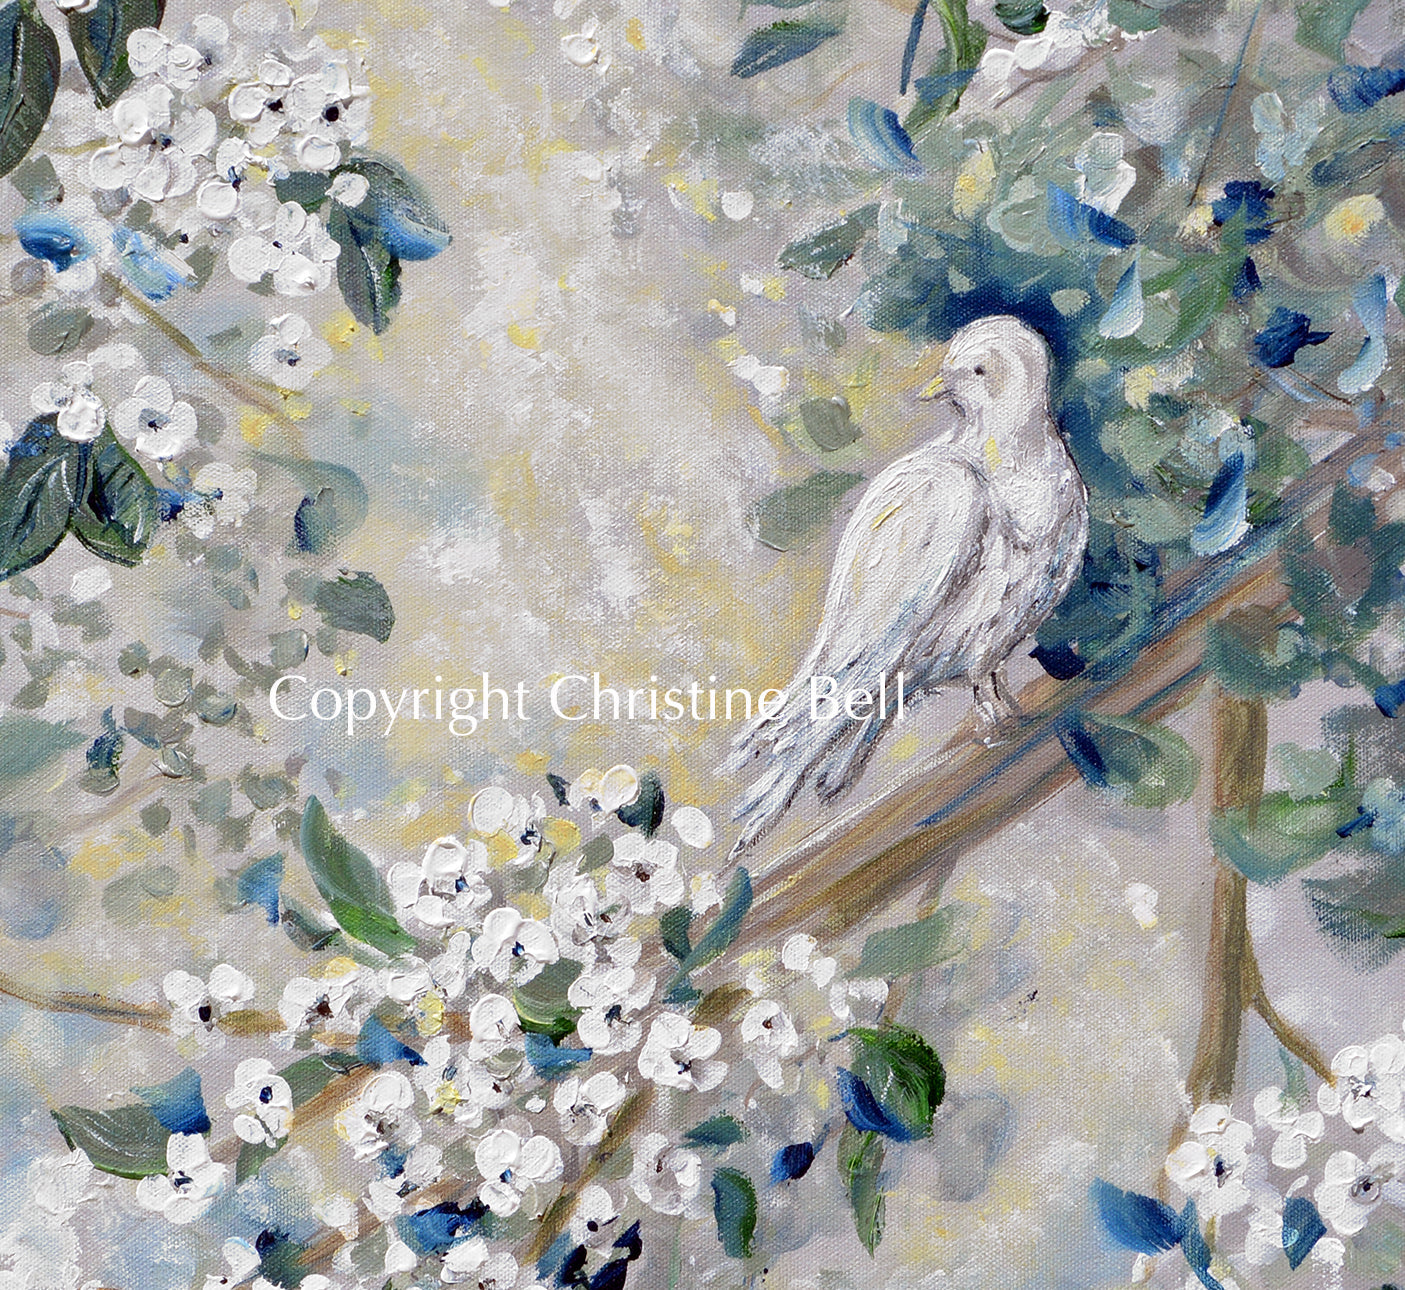 "Pure Peace" SPECIAL RELEASE GICLEE PRINT Art Abstract Floral Flowers Painting White Cherry Blossoms White Dove